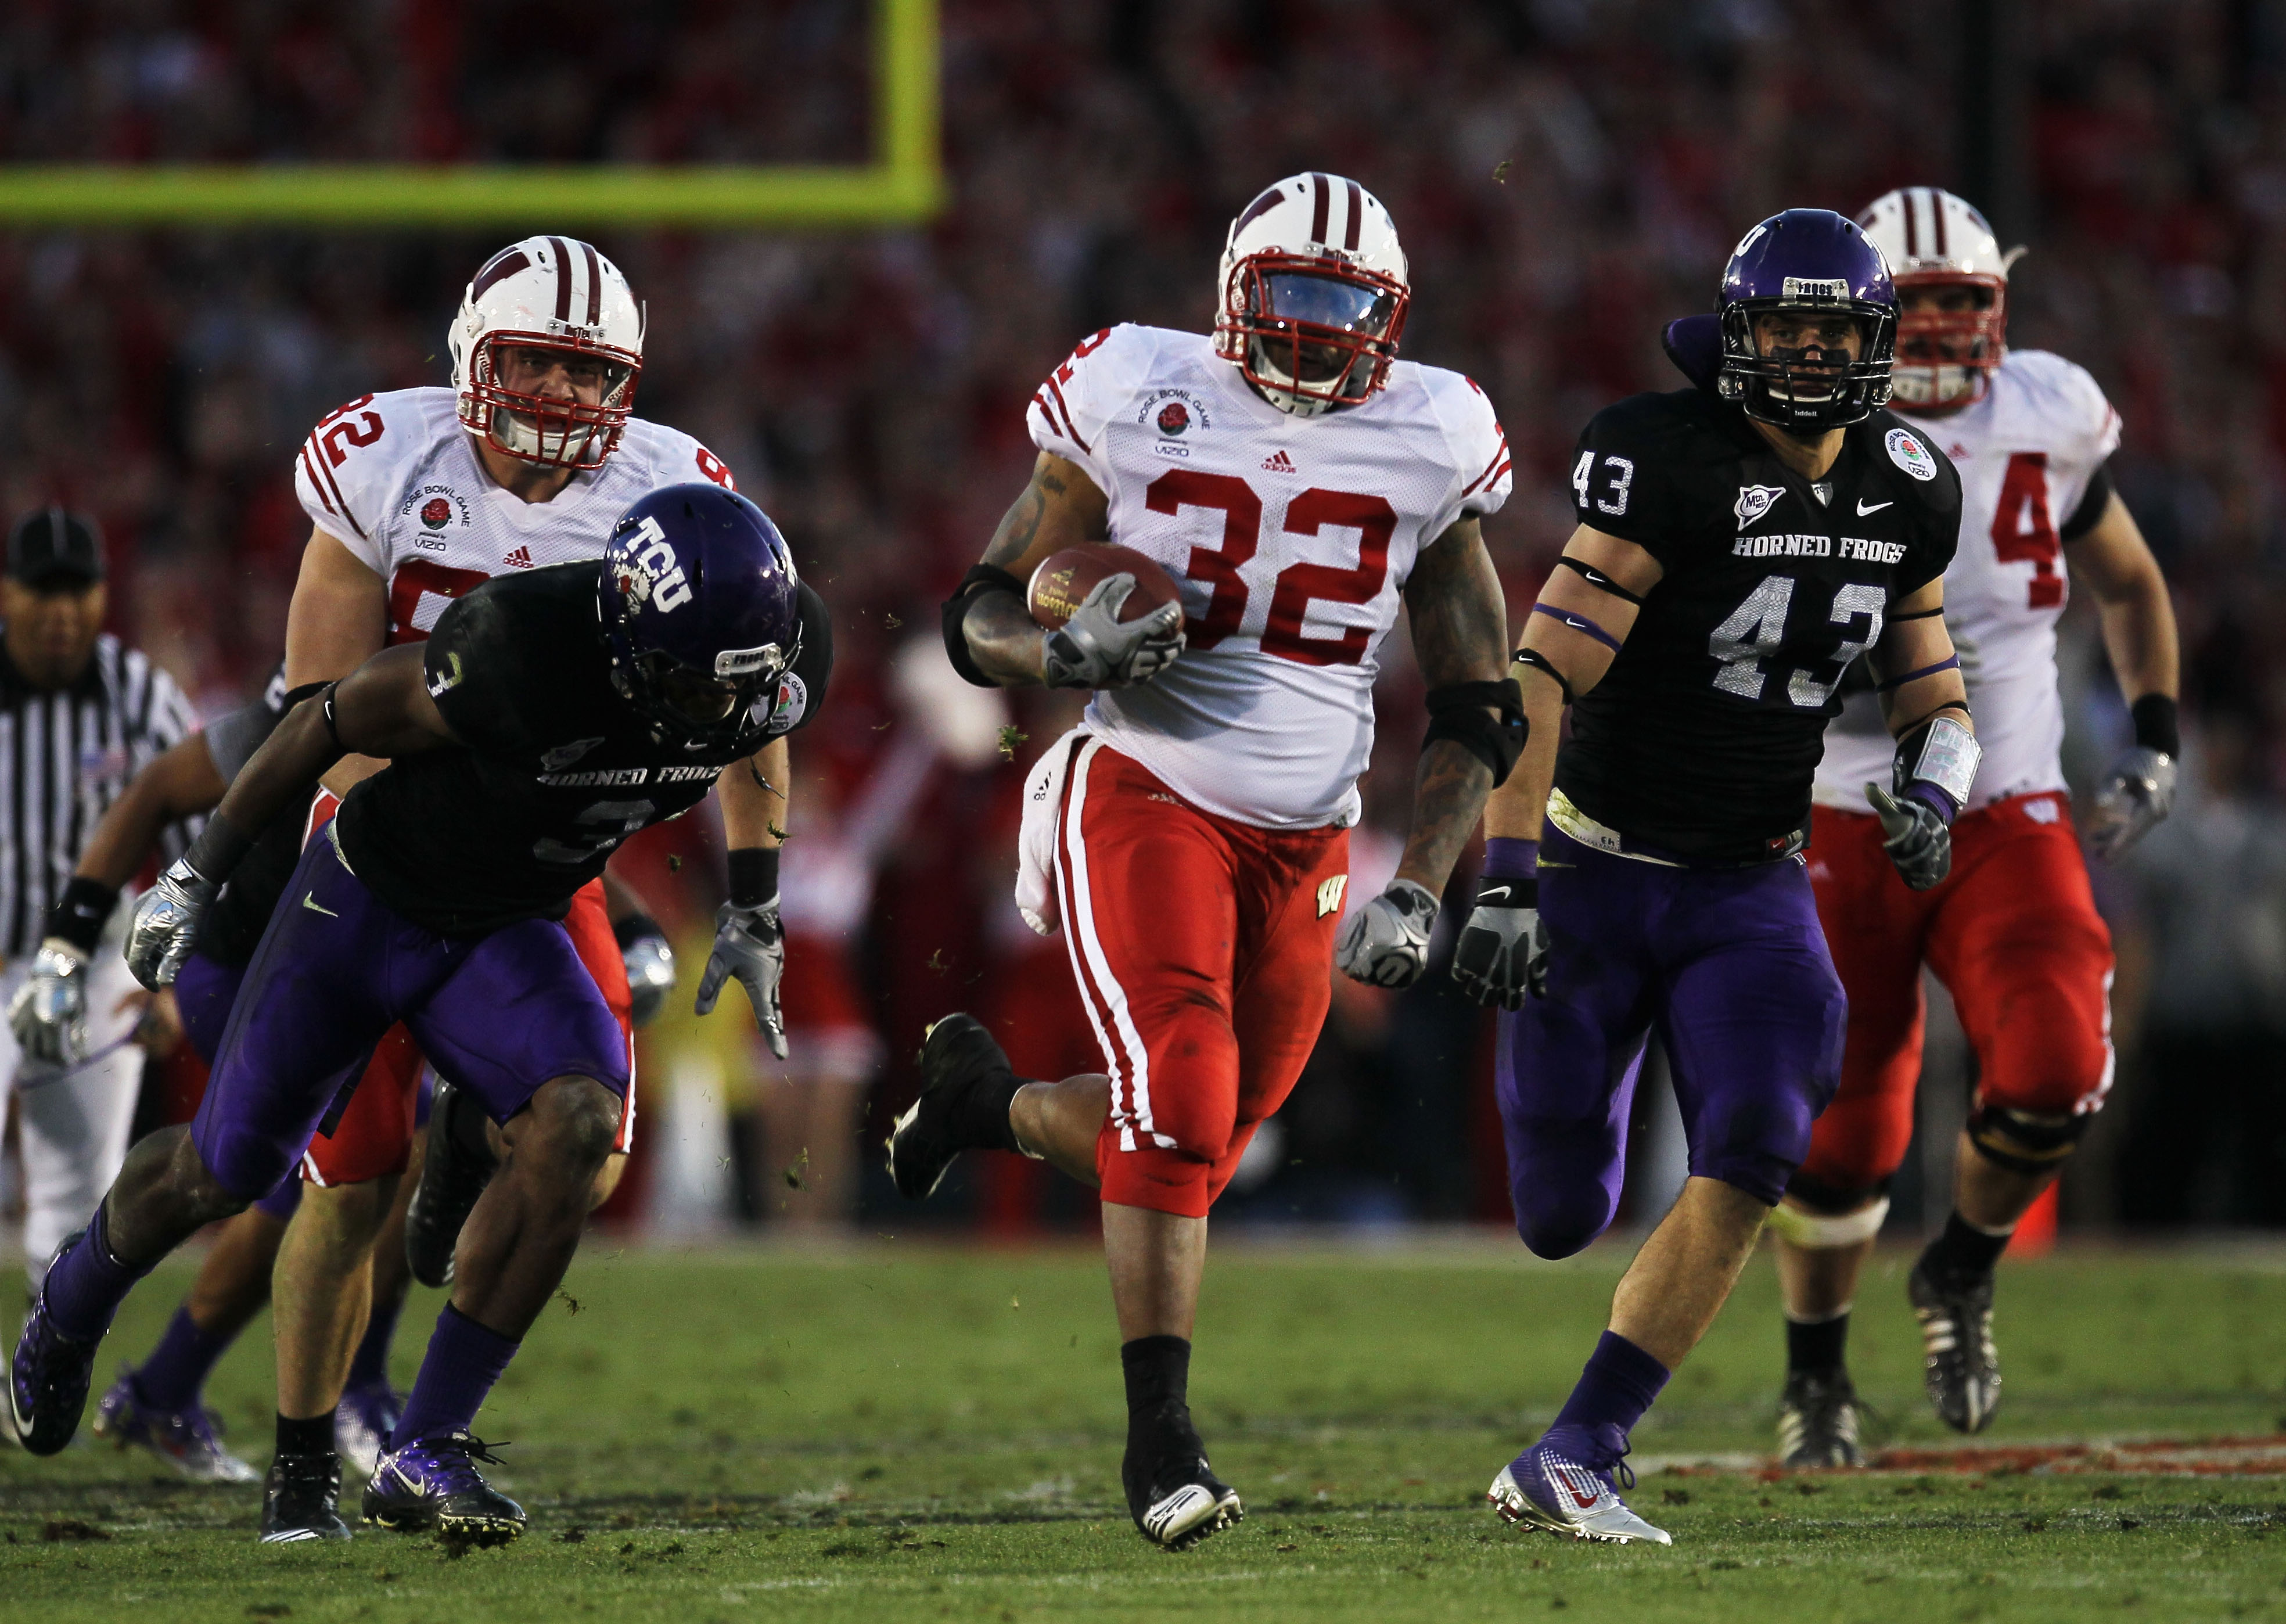 PASADENA, CA - JANUARY 01:  Running back John Clay #32 of the Wisconsin Badgers rushes with the ball against the TCU Horned Frogs in the fourth quarter of the 97th Rose Bowl game on January 1, 2011 in Pasadena, California.  (Photo by Stephen Dunn/Getty Im